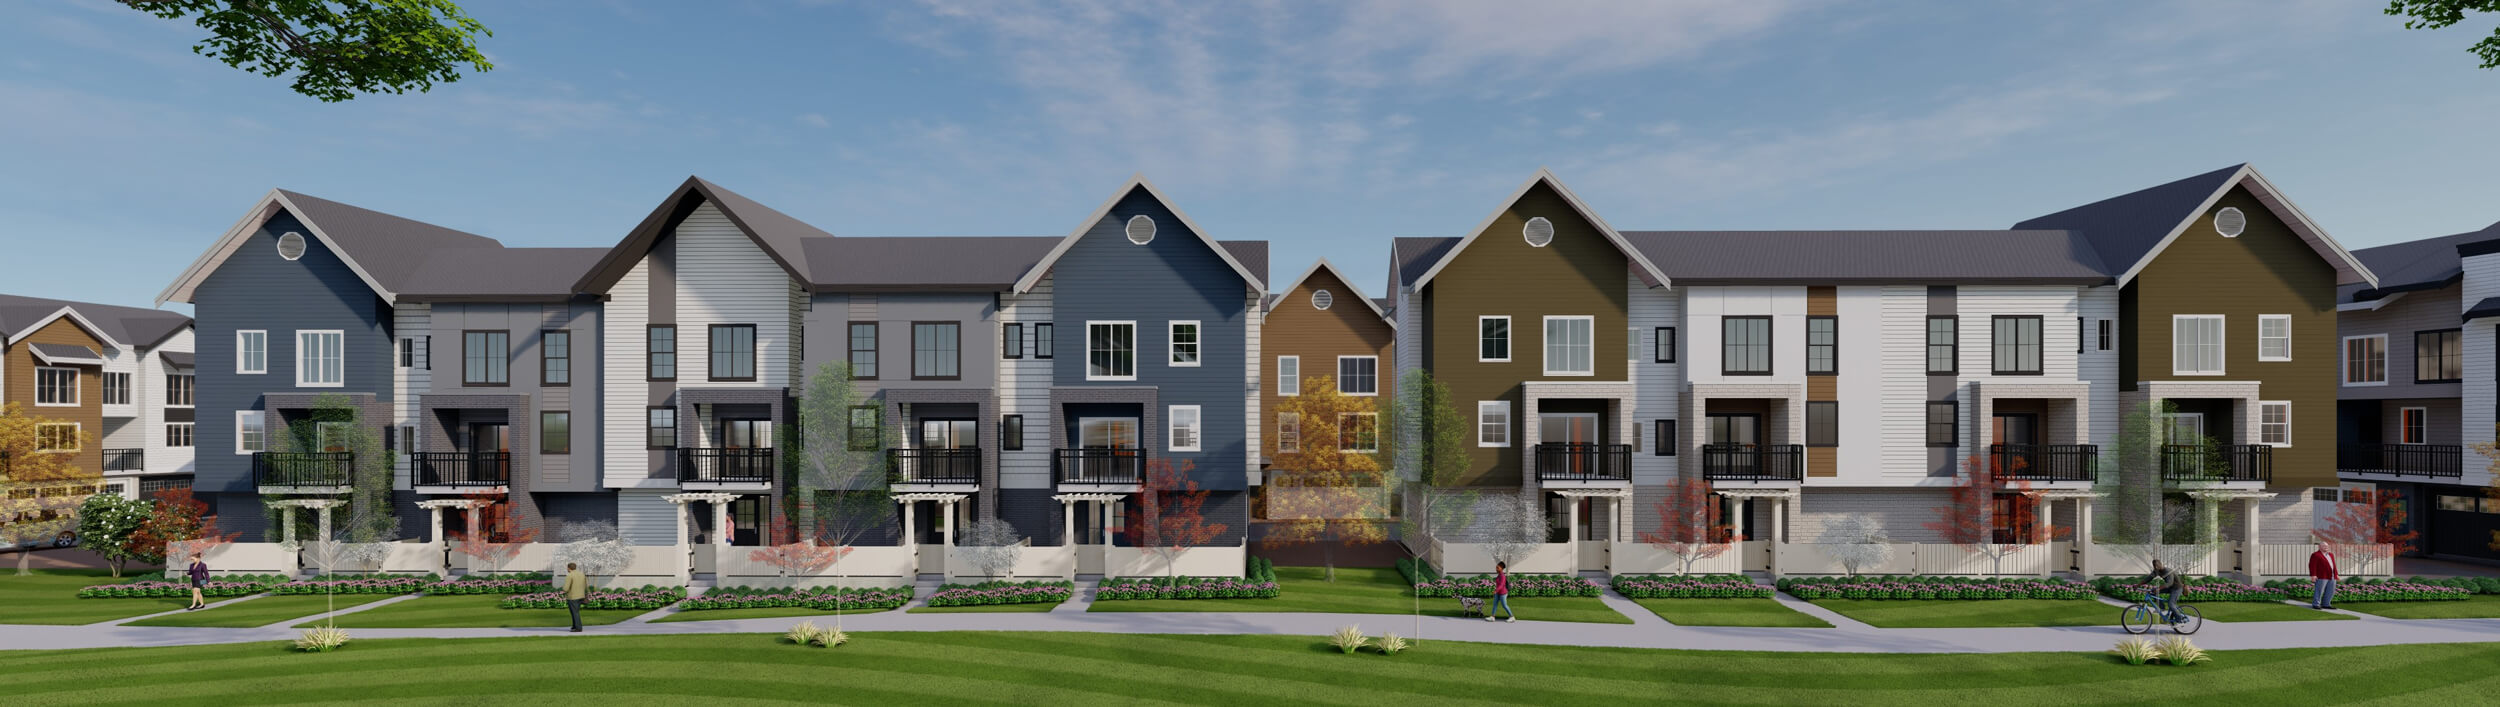 The “Central Gordon Townhomes” development is a multi-family townhomes project in Langley. Design by Group 161 | DF Architecture.